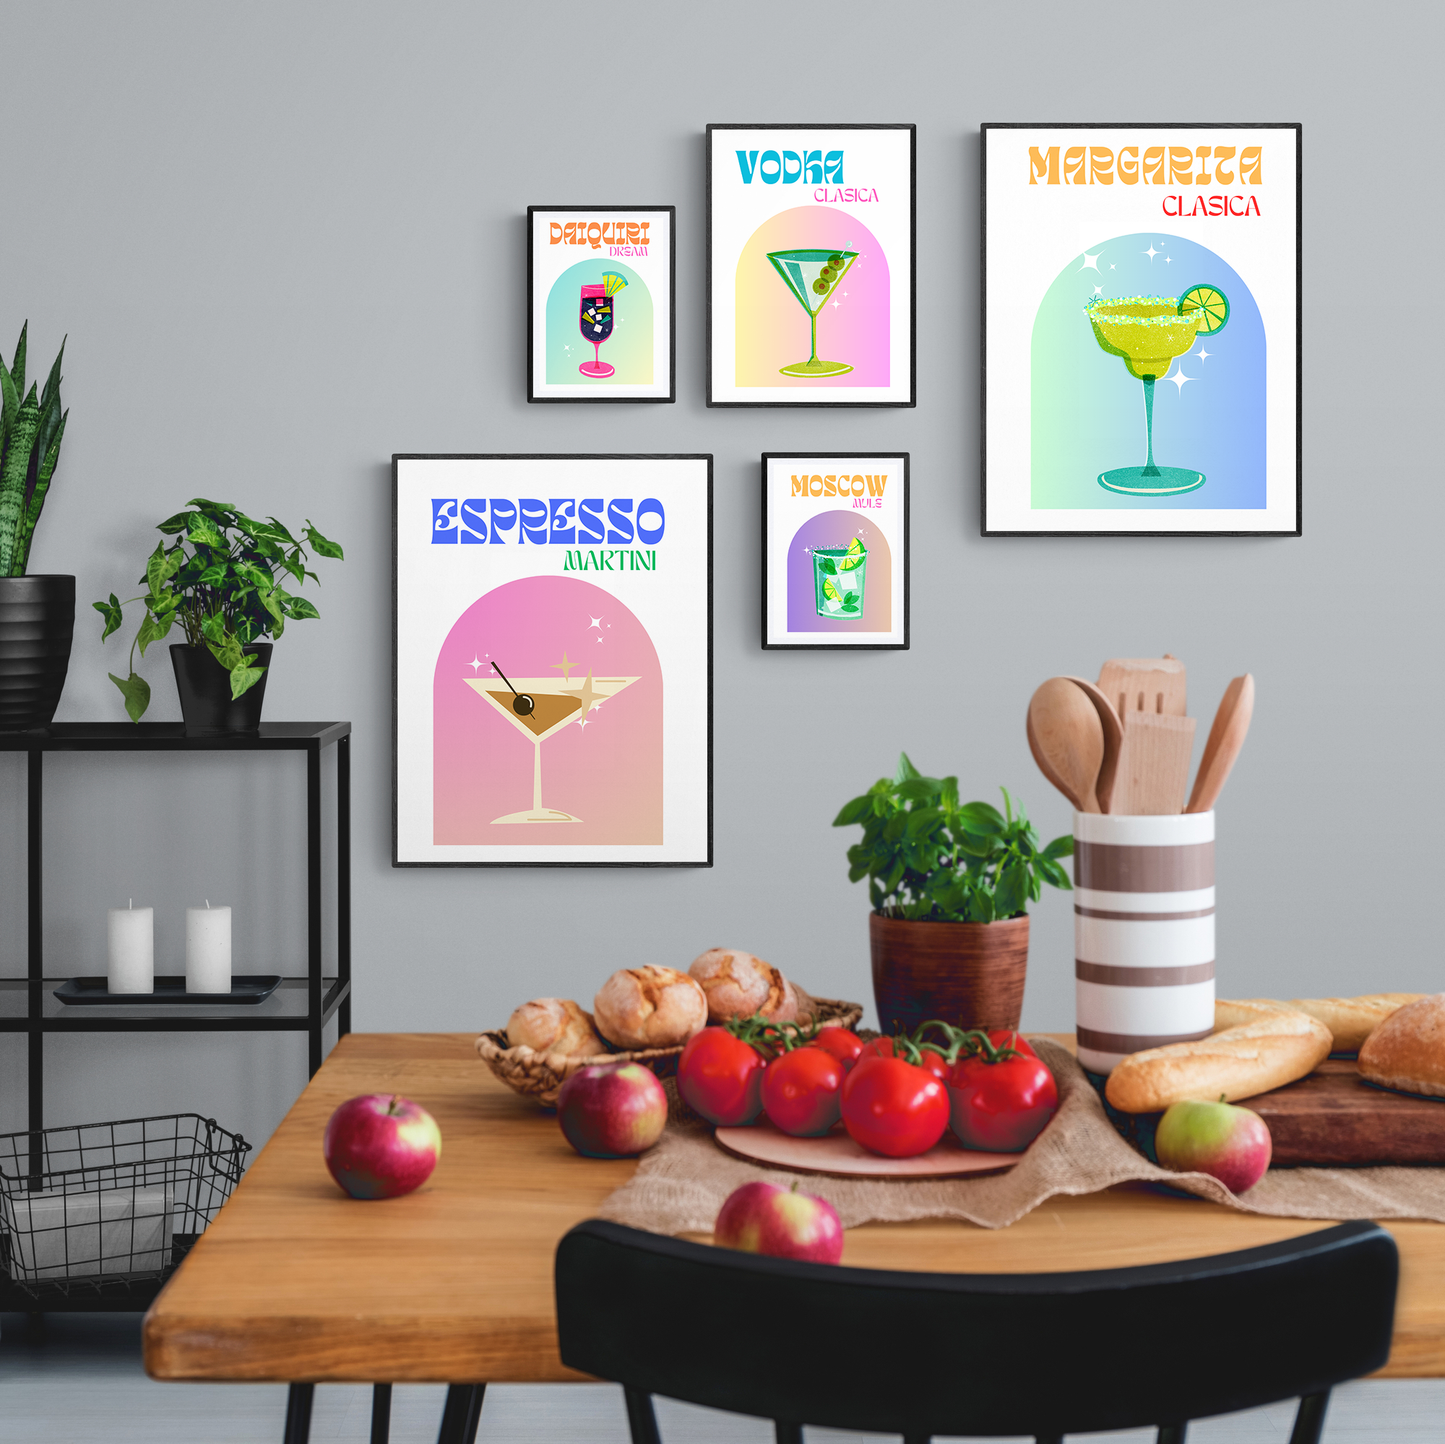 Take the tequila sunshine right into your home with this one-of-a-kind cocktail-inspired wall art poster! Bright colors and bold lines feature a delicious recipe, plus other popular subjects like bar cart art, flower wall décor, and kitchen wall prints. Discover the perfect gift for your Boho-loving friends, or a colorful addition to your own art collection. So cheers, take a sip and get ready to be inspired!